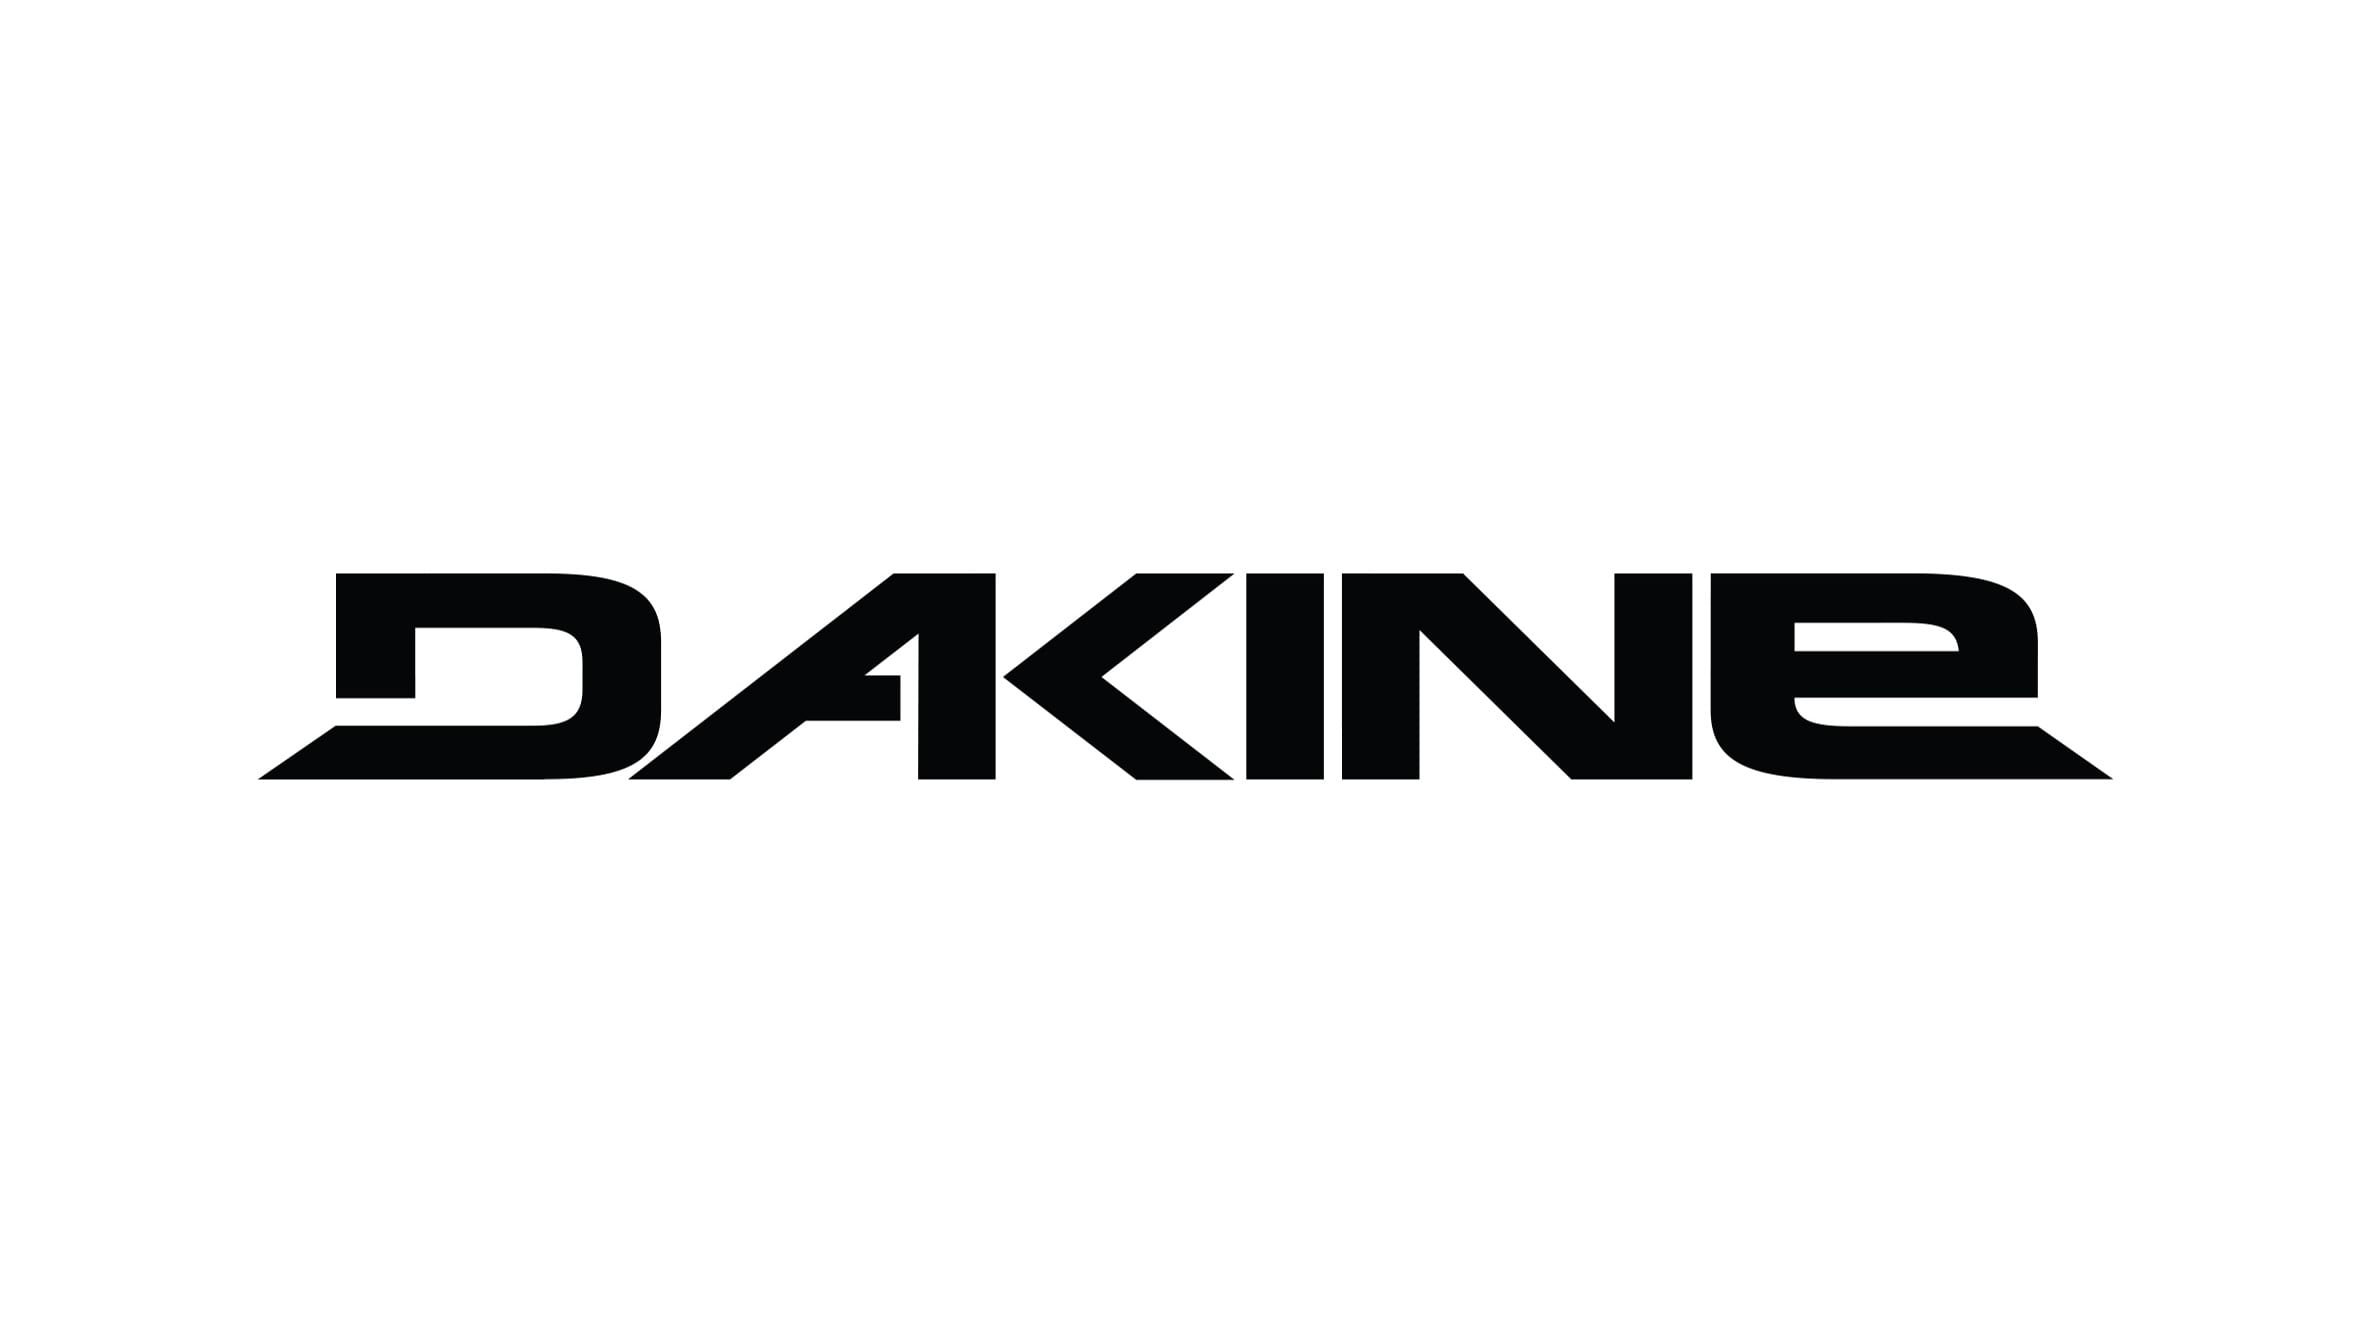 Dakine is a partner of Squaw Valley Alpine Meadows. 